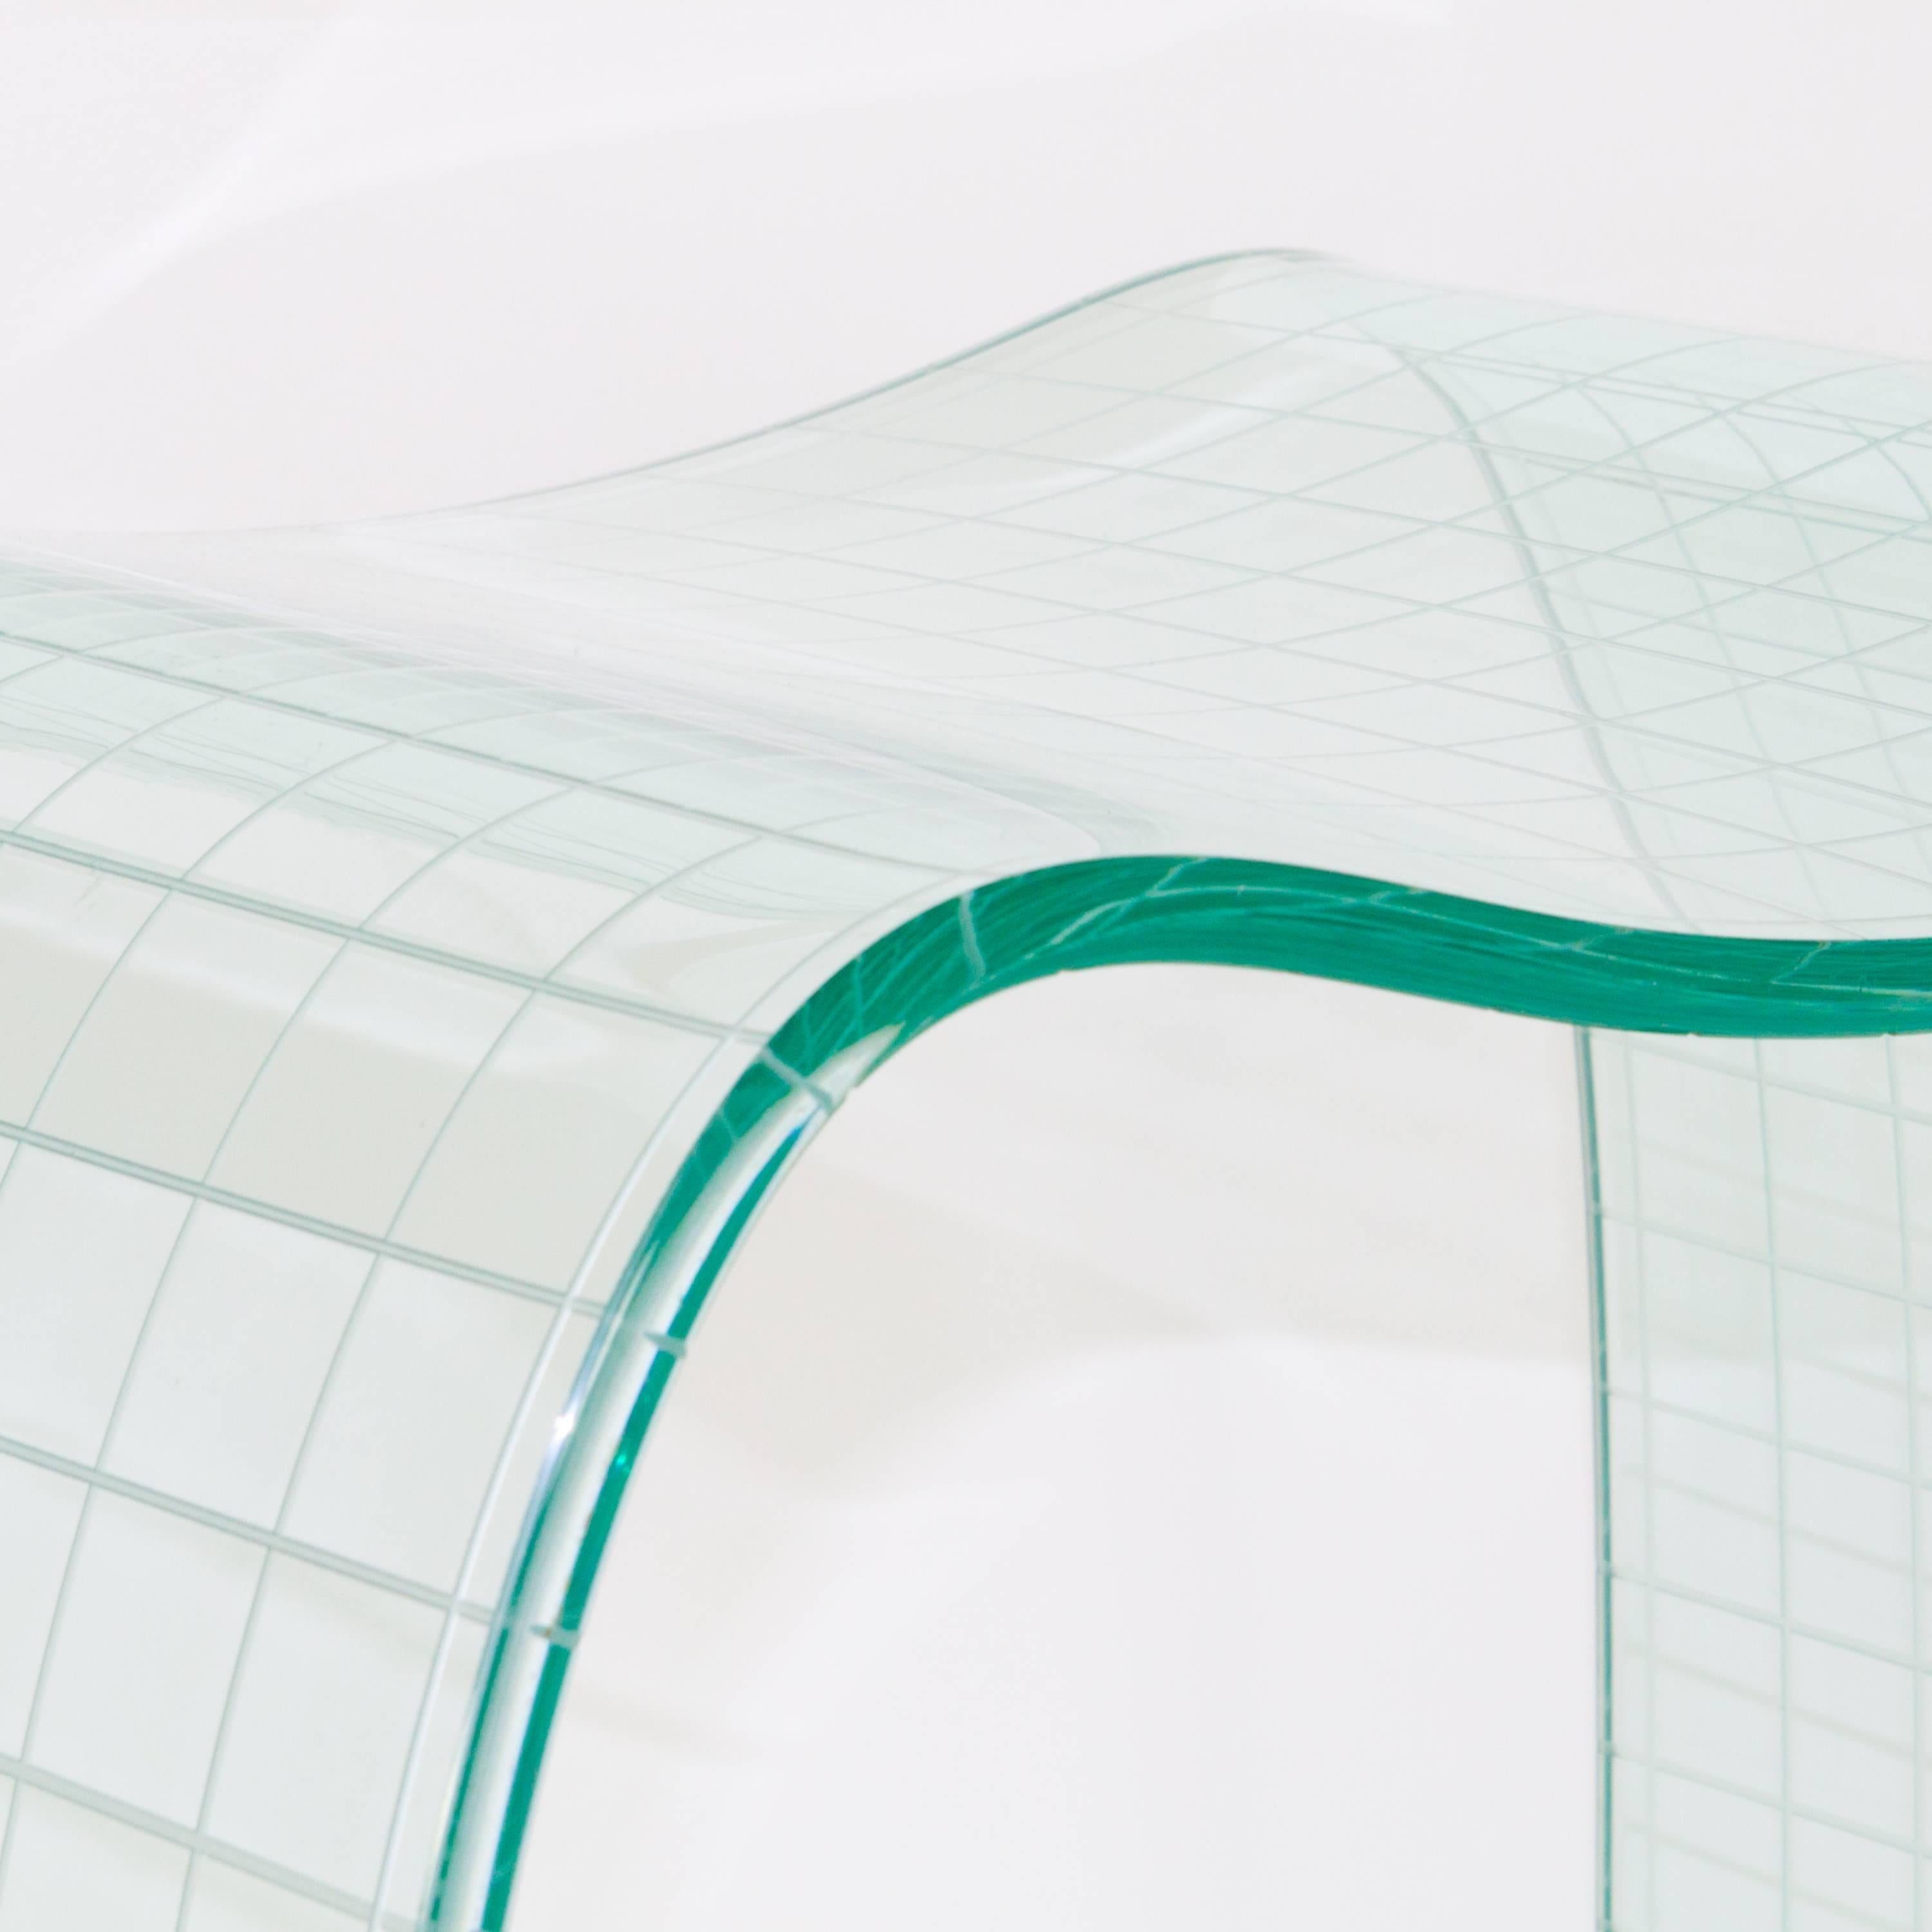 Onda Incisa glass stool by Vittorio Livi for Fiam, featuring expertly engineered glass curvature with an incised structural grid.